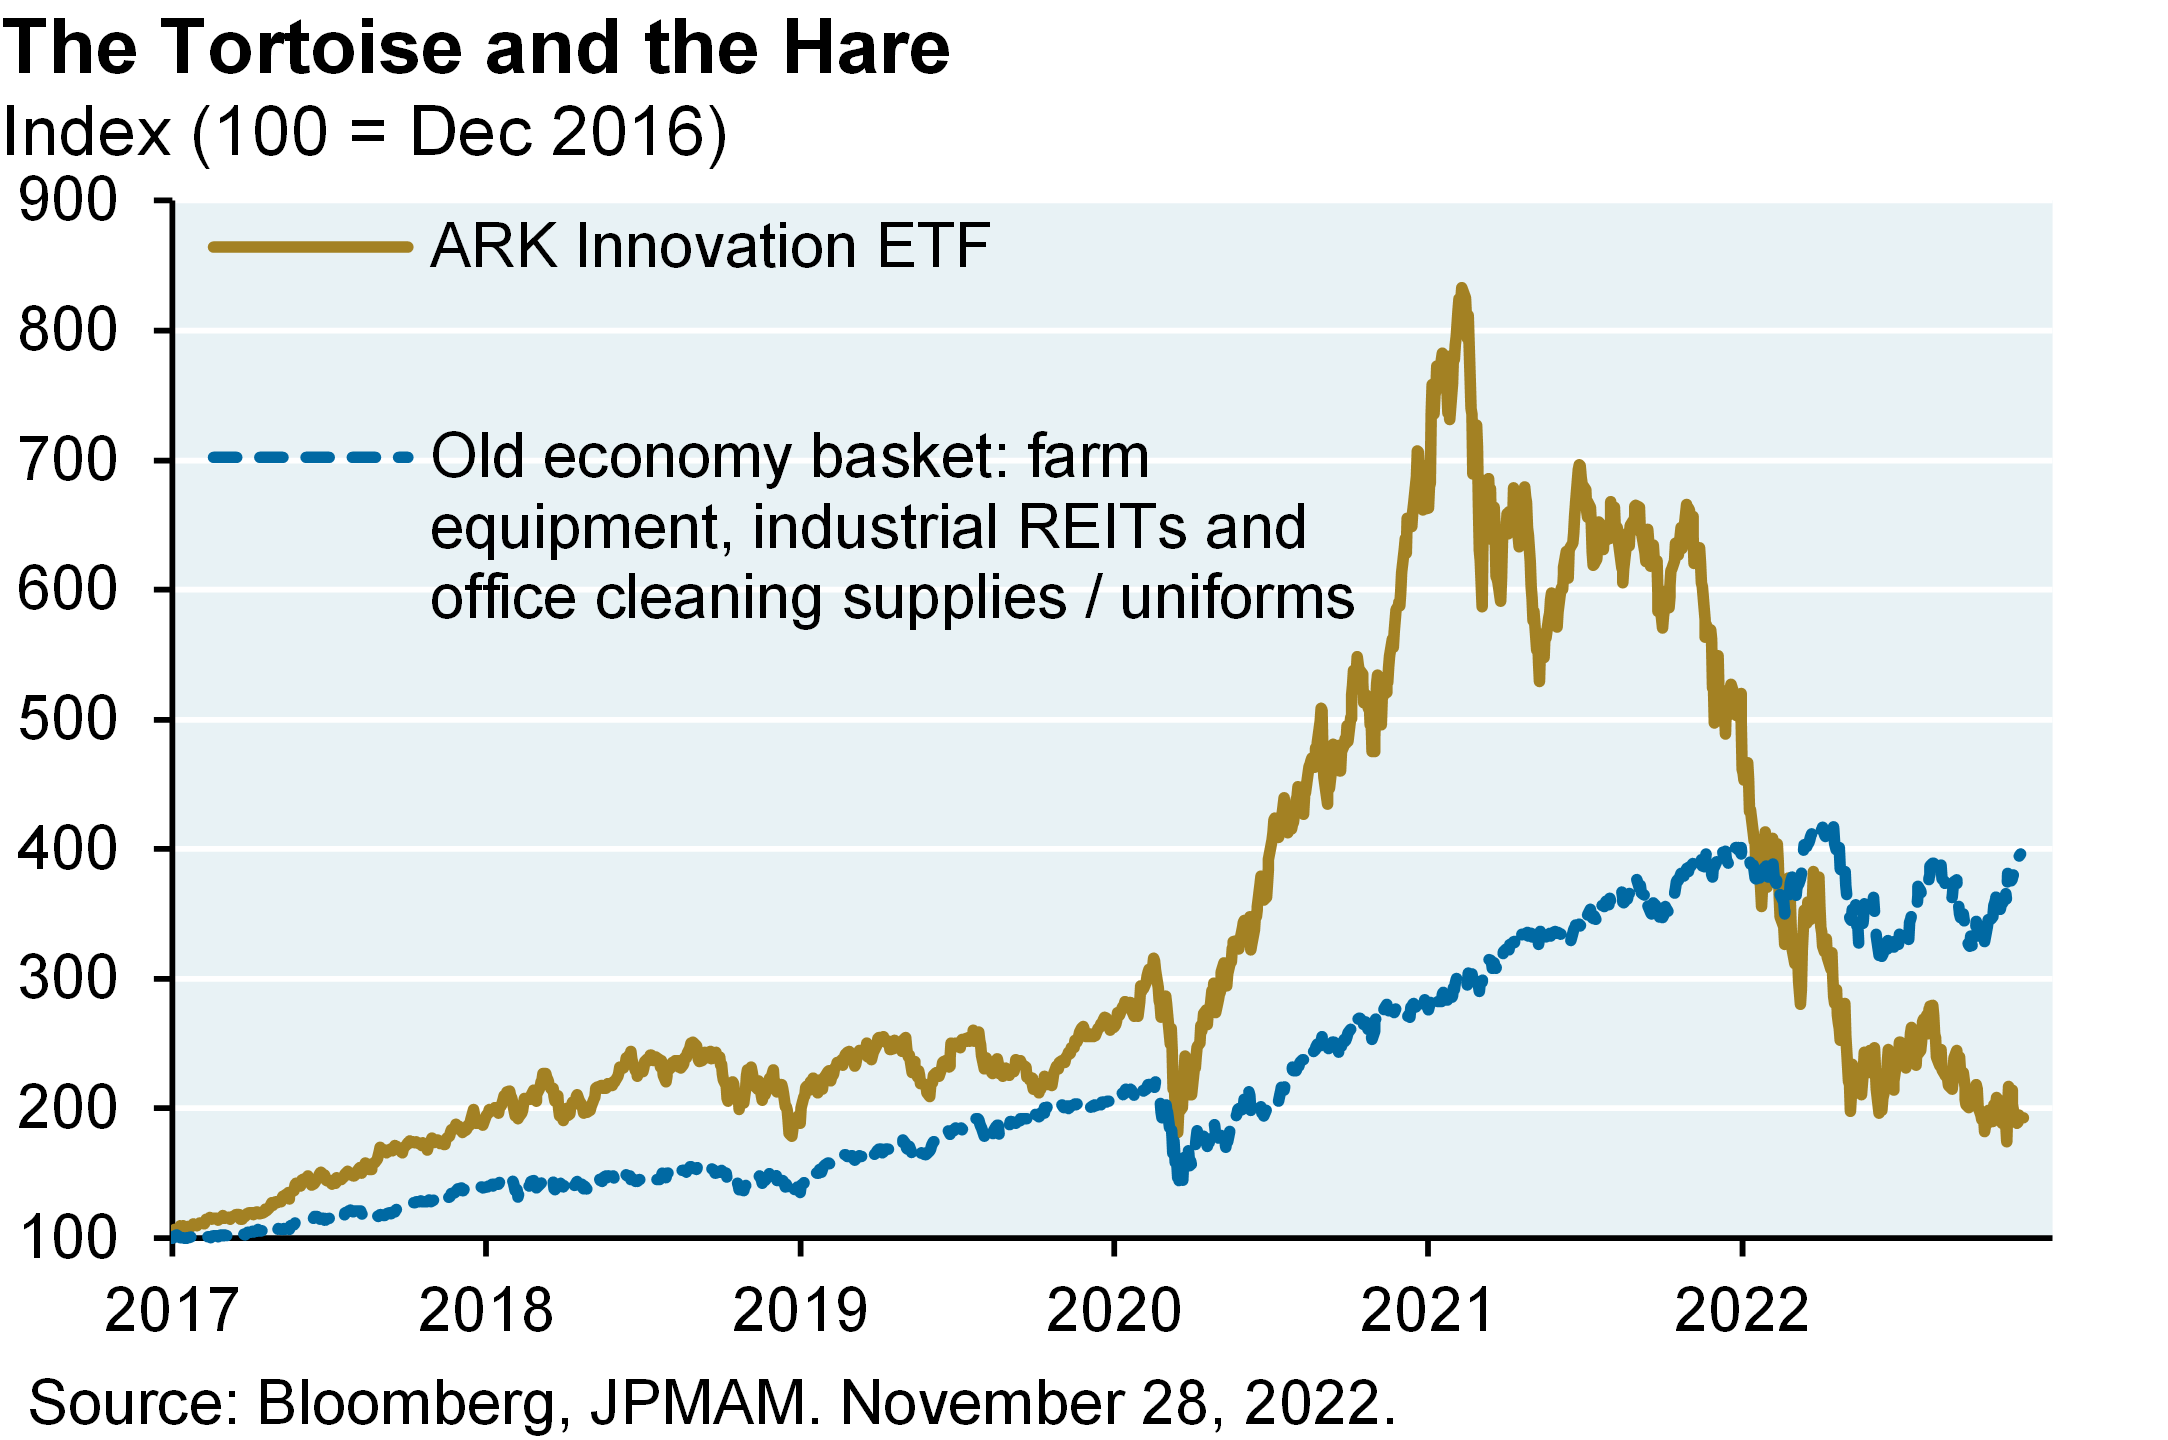 Line chart compares ARK Innovation ETF vs an old economy basket of farm equipment, office cleaning supplies and industrial REITS since 2017. The line chart shows that the old economy basket is now outperforming ARK Innovation ETF, which has declined by ~75% since February 2021.